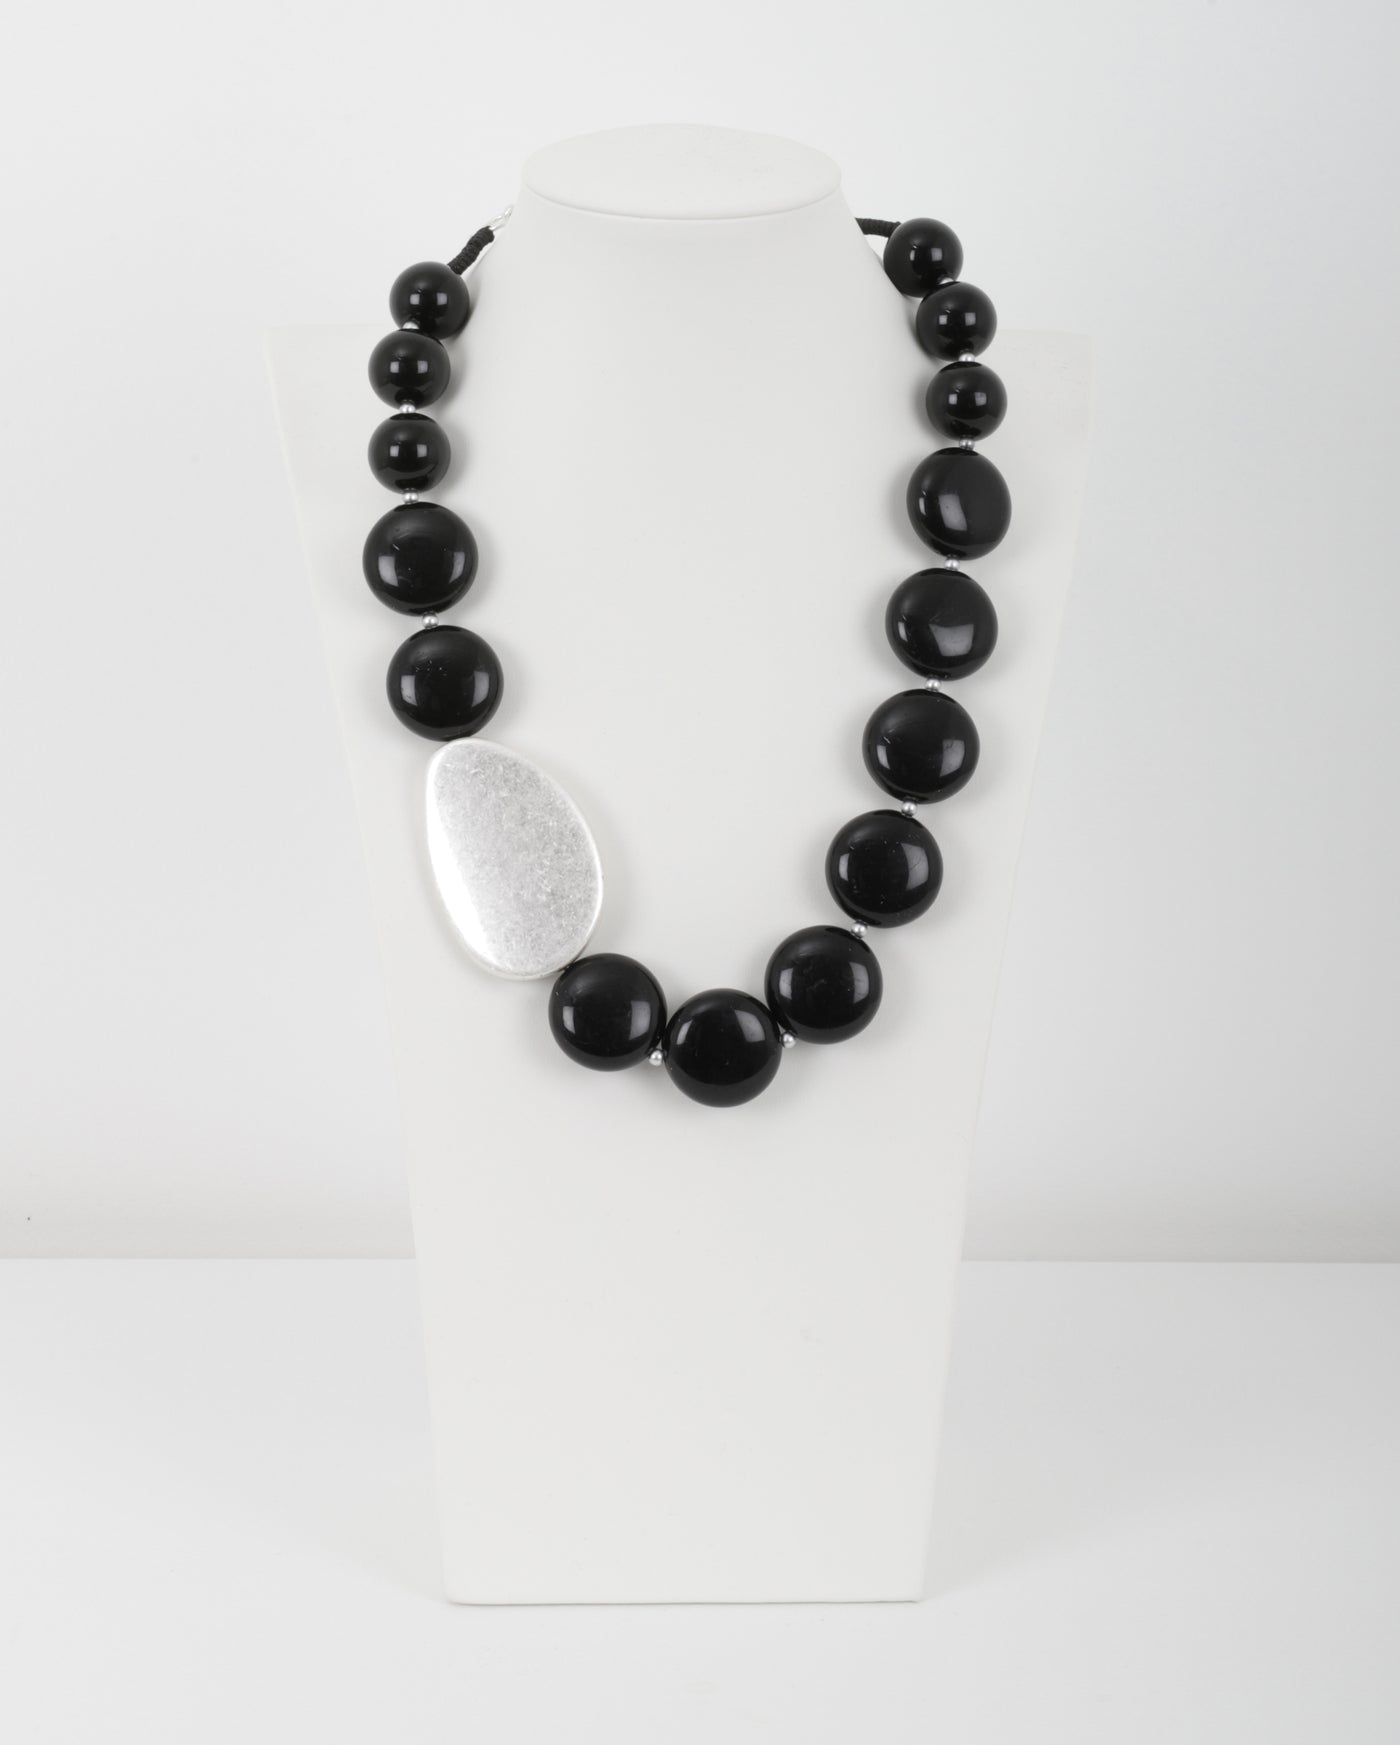 Merx Short Black Bead Necklace with Silver Oval